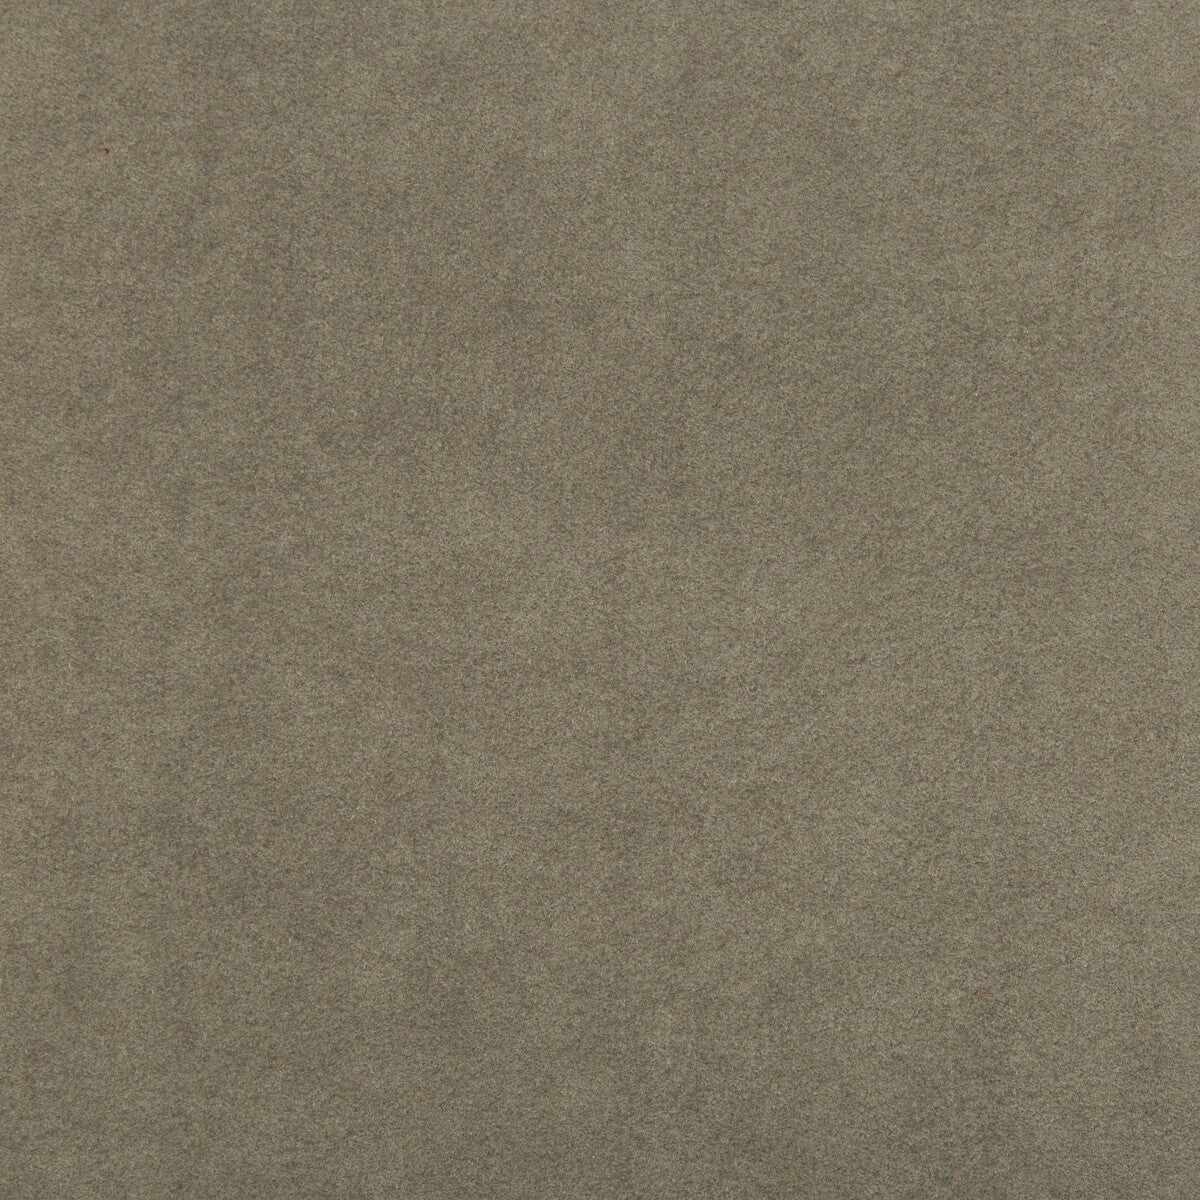 Ultrasuede Green fabric in oatmeal color - pattern 30787.106.0 - by Kravet Design in the Performance collection